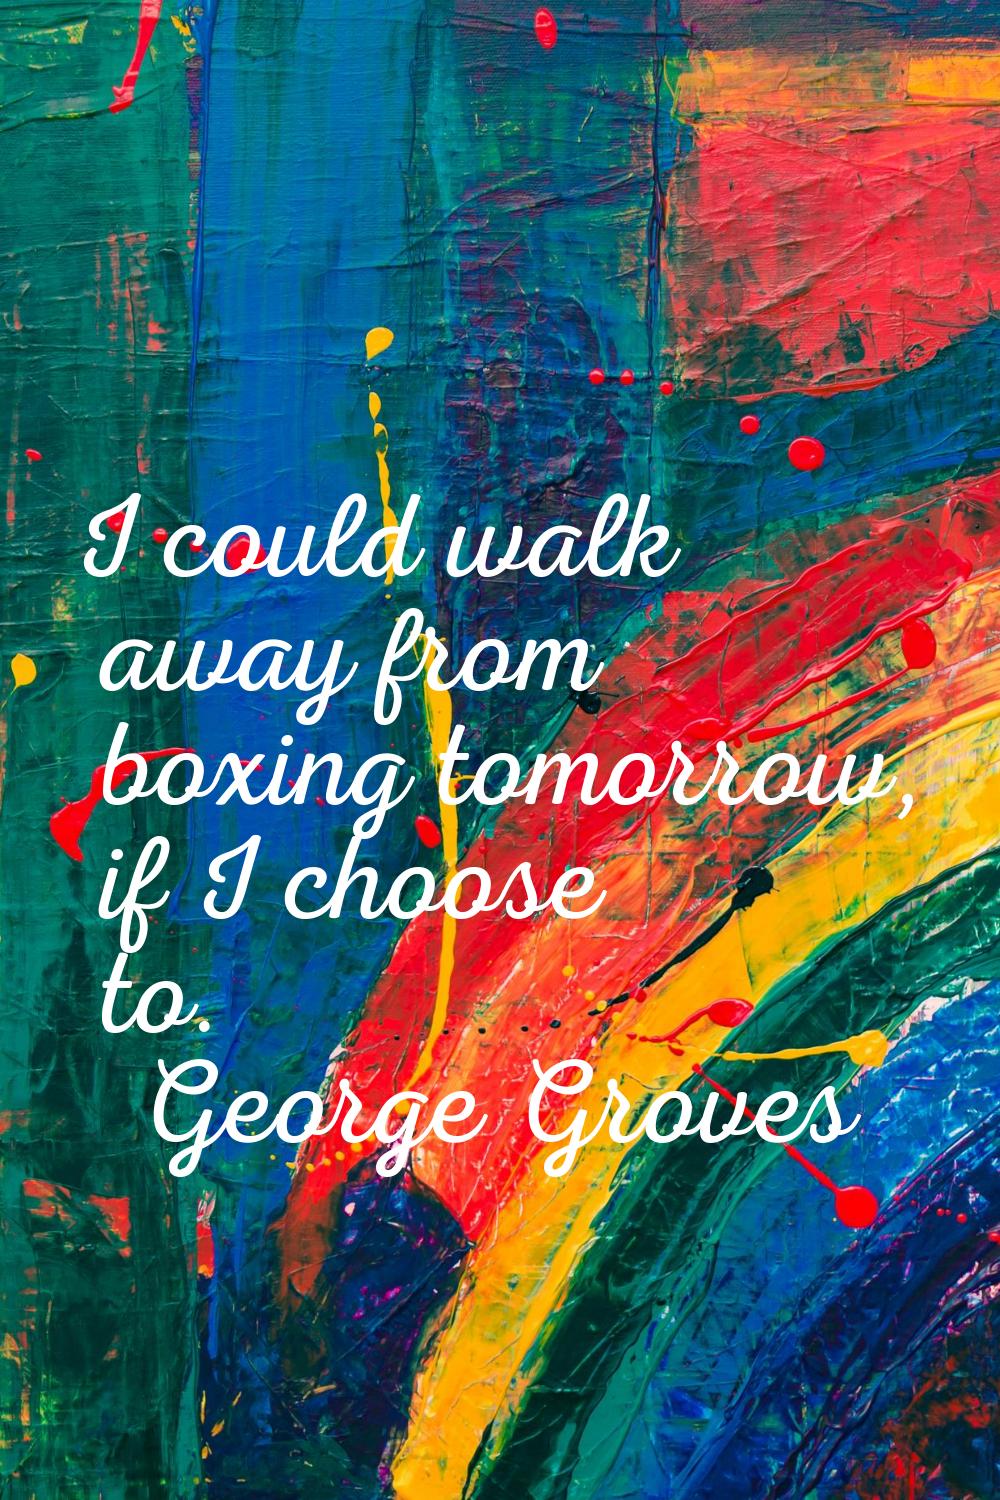 I could walk away from boxing tomorrow, if I choose to.